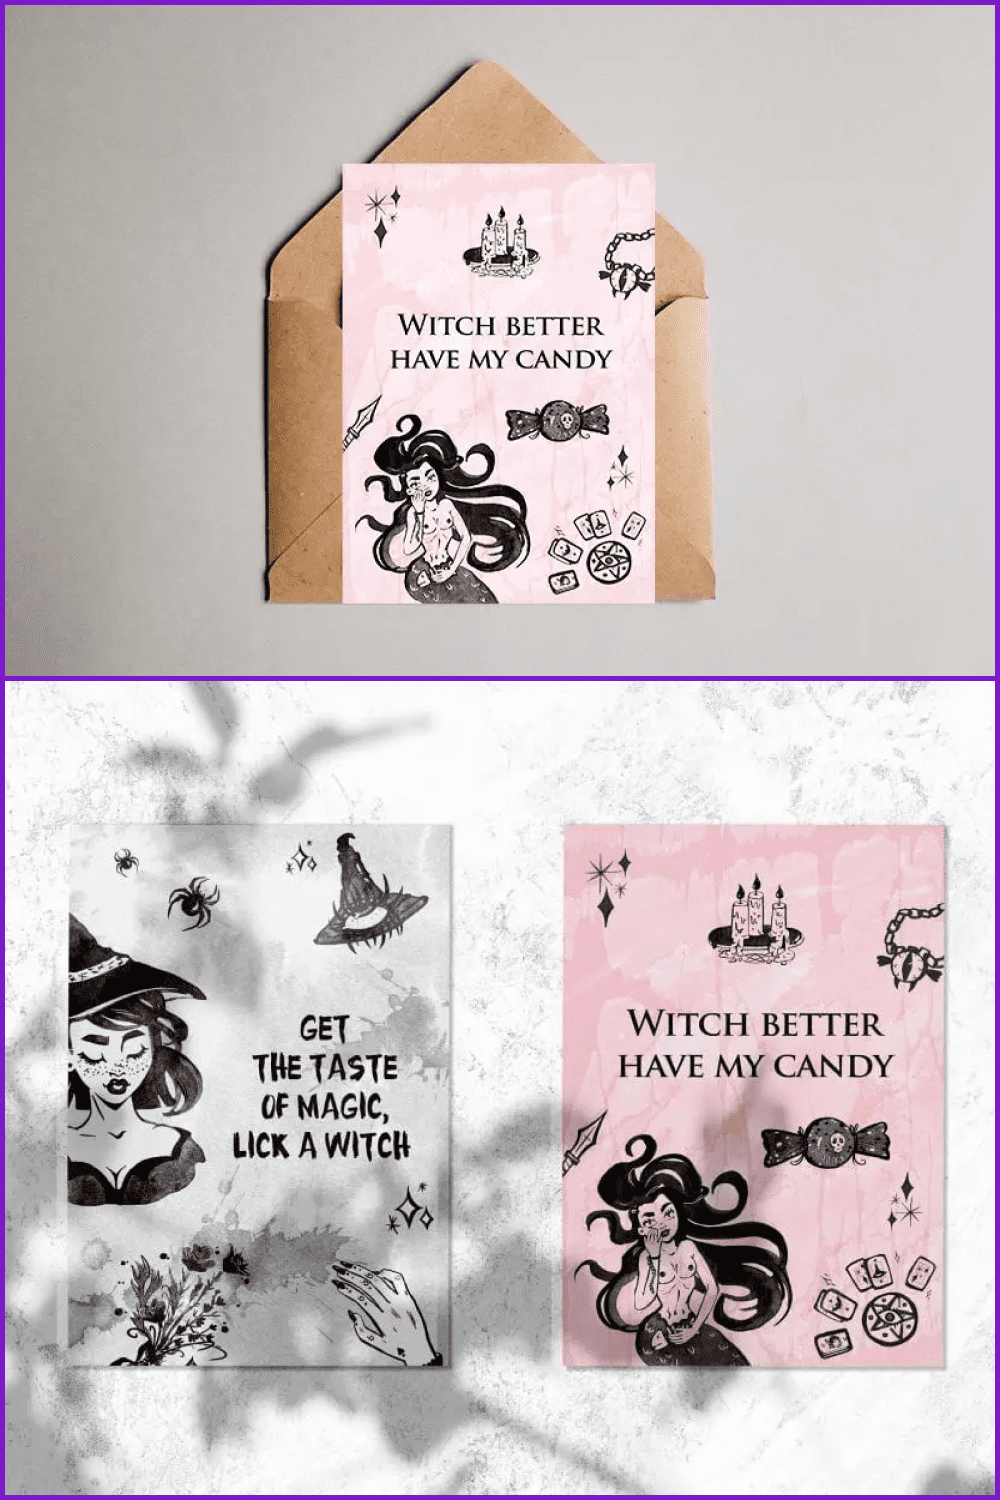 Vintage black and white Halloween cards with witches.